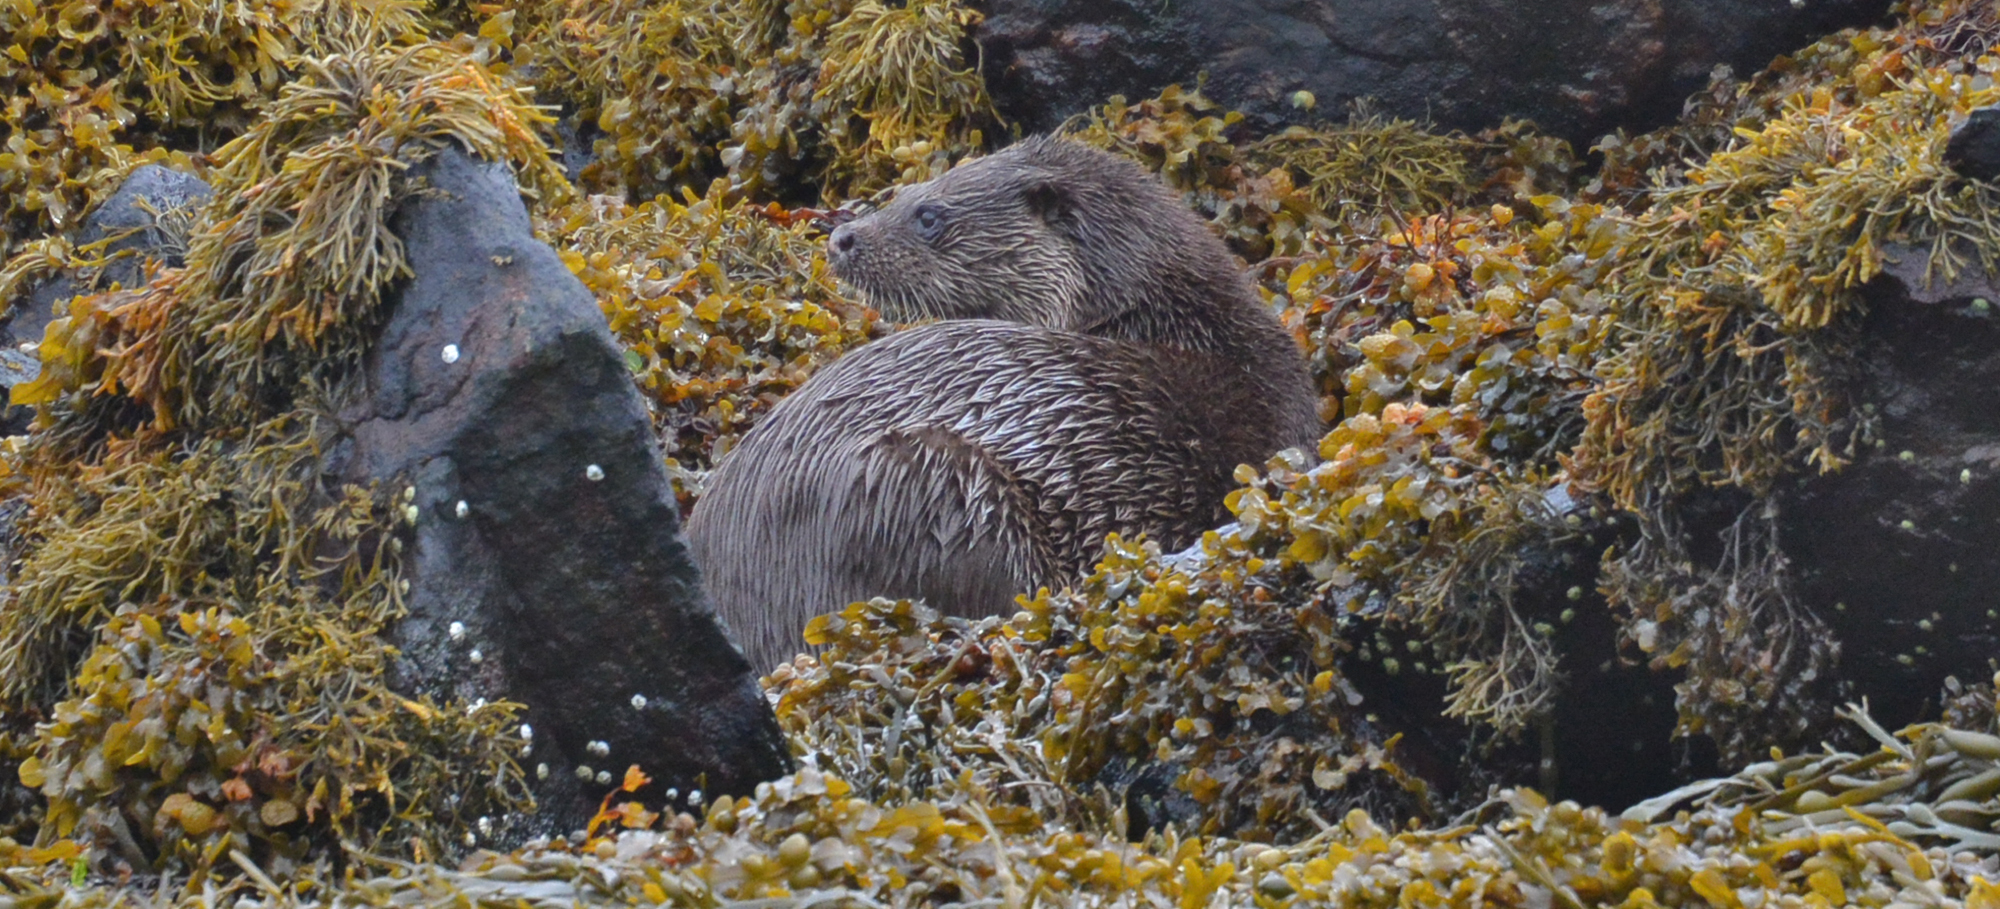 An otter in the weed and rocks